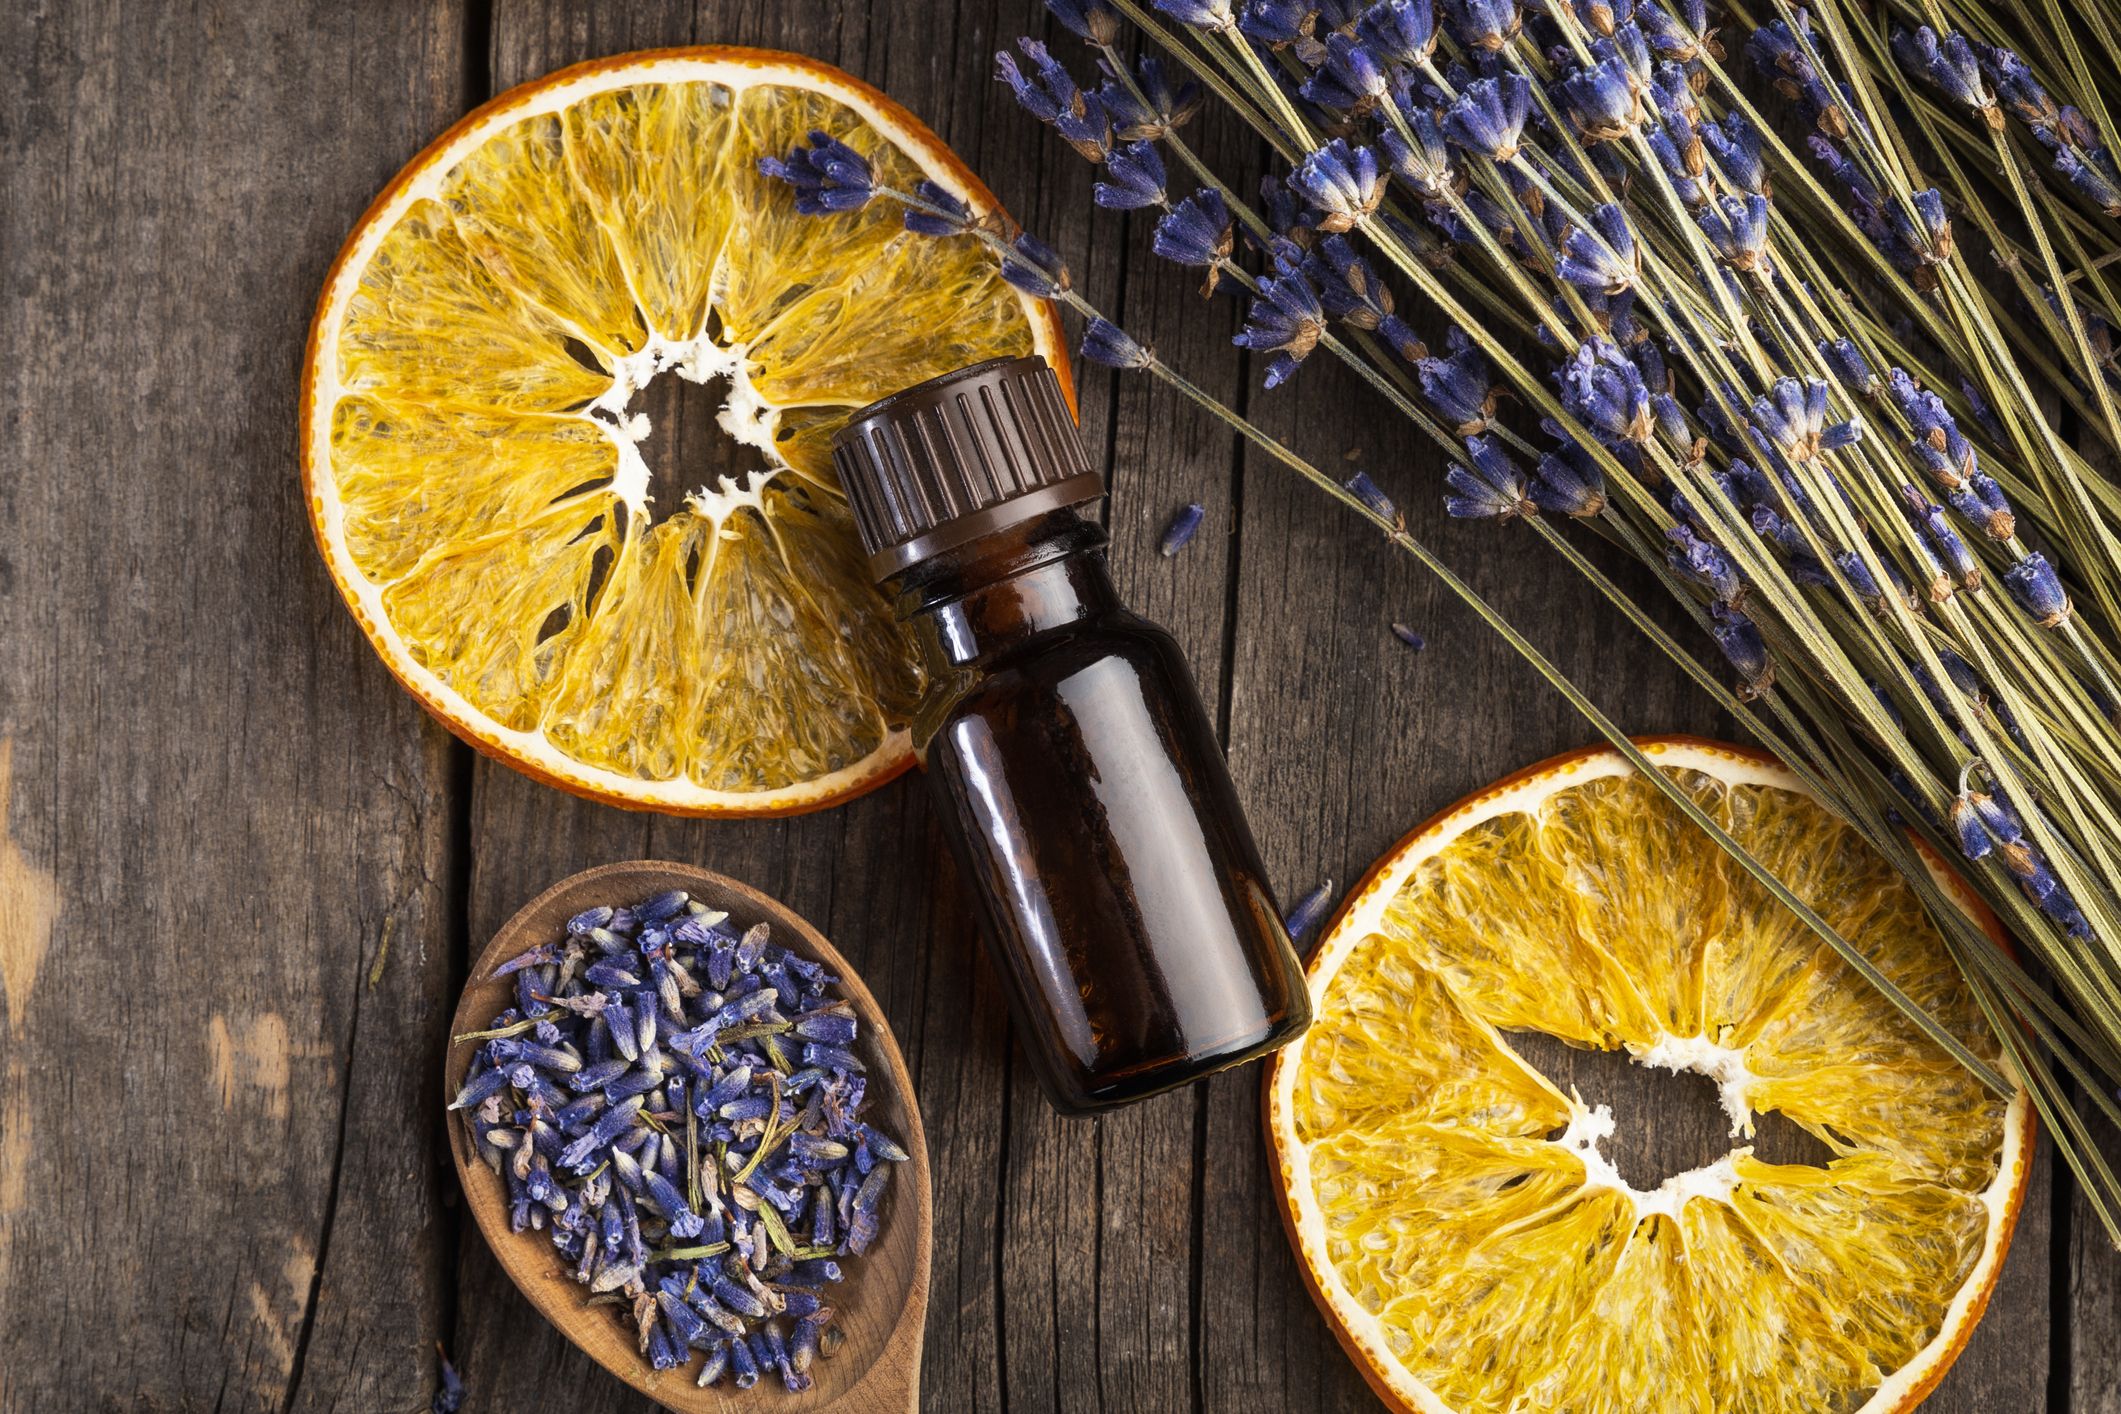 Uplift Aromatherapy Essential Oil Blend - Happy Essential Oil Blend of  Calming Essential Oils for Diffusers for Home and Travel Citrus Essential  Oils